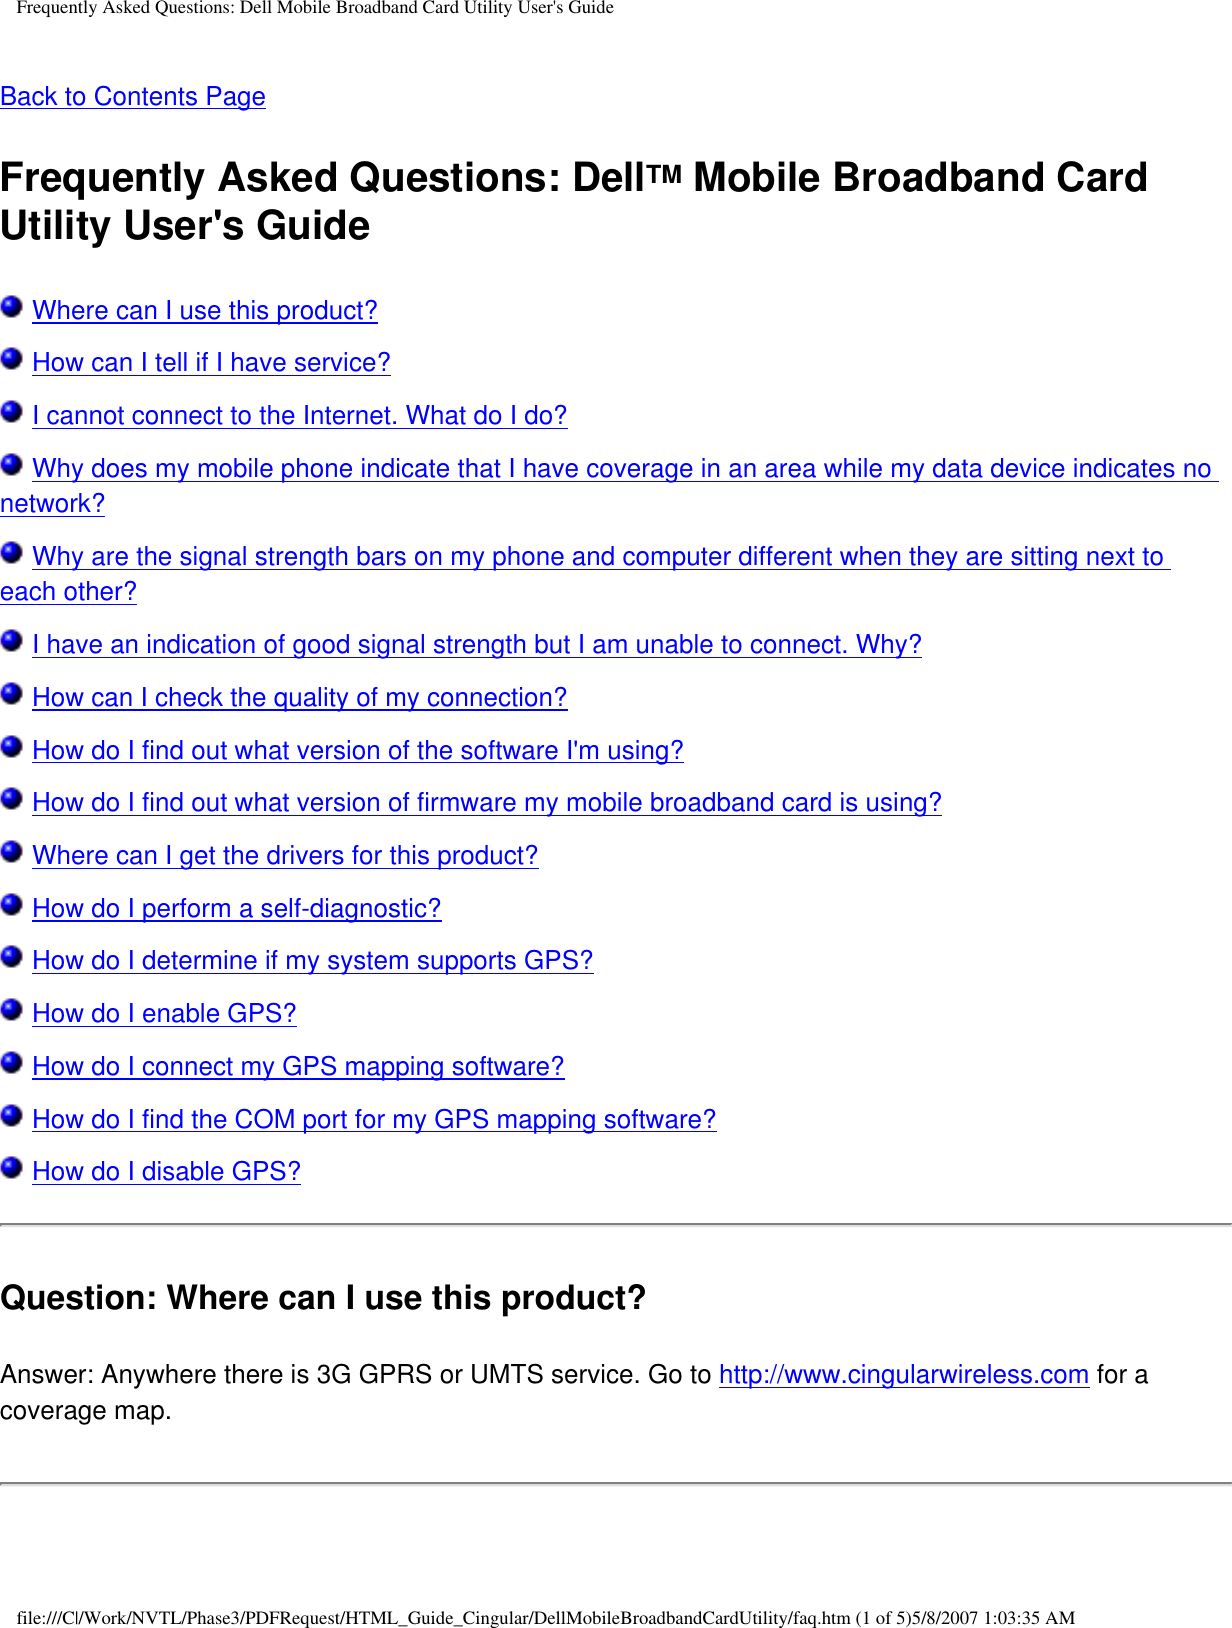 Frequently Asked Questions: Dell Mobile Broadband Card Utility User&apos;s GuideBack to Contents Page Frequently Asked Questions: DellTM Mobile Broadband Card Utility User&apos;s Guide Where can I use this product? How can I tell if I have service? I cannot connect to the Internet. What do I do? Why does my mobile phone indicate that I have coverage in an area while my data device indicates no network? Why are the signal strength bars on my phone and computer different when they are sitting next to each other? I have an indication of good signal strength but I am unable to connect. Why? How can I check the quality of my connection? How do I find out what version of the software I&apos;m using? How do I find out what version of firmware my mobile broadband card is using? Where can I get the drivers for this product? How do I perform a self-diagnostic? How do I determine if my system supports GPS? How do I enable GPS? How do I connect my GPS mapping software? How do I find the COM port for my GPS mapping software? How do I disable GPS?Question: Where can I use this product? Answer: Anywhere there is 3G GPRS or UMTS service. Go to http://www.cingularwireless.com for a coverage map.file:///C|/Work/NVTL/Phase3/PDFRequest/HTML_Guide_Cingular/DellMobileBroadbandCardUtility/faq.htm (1 of 5)5/8/2007 1:03:35 AM